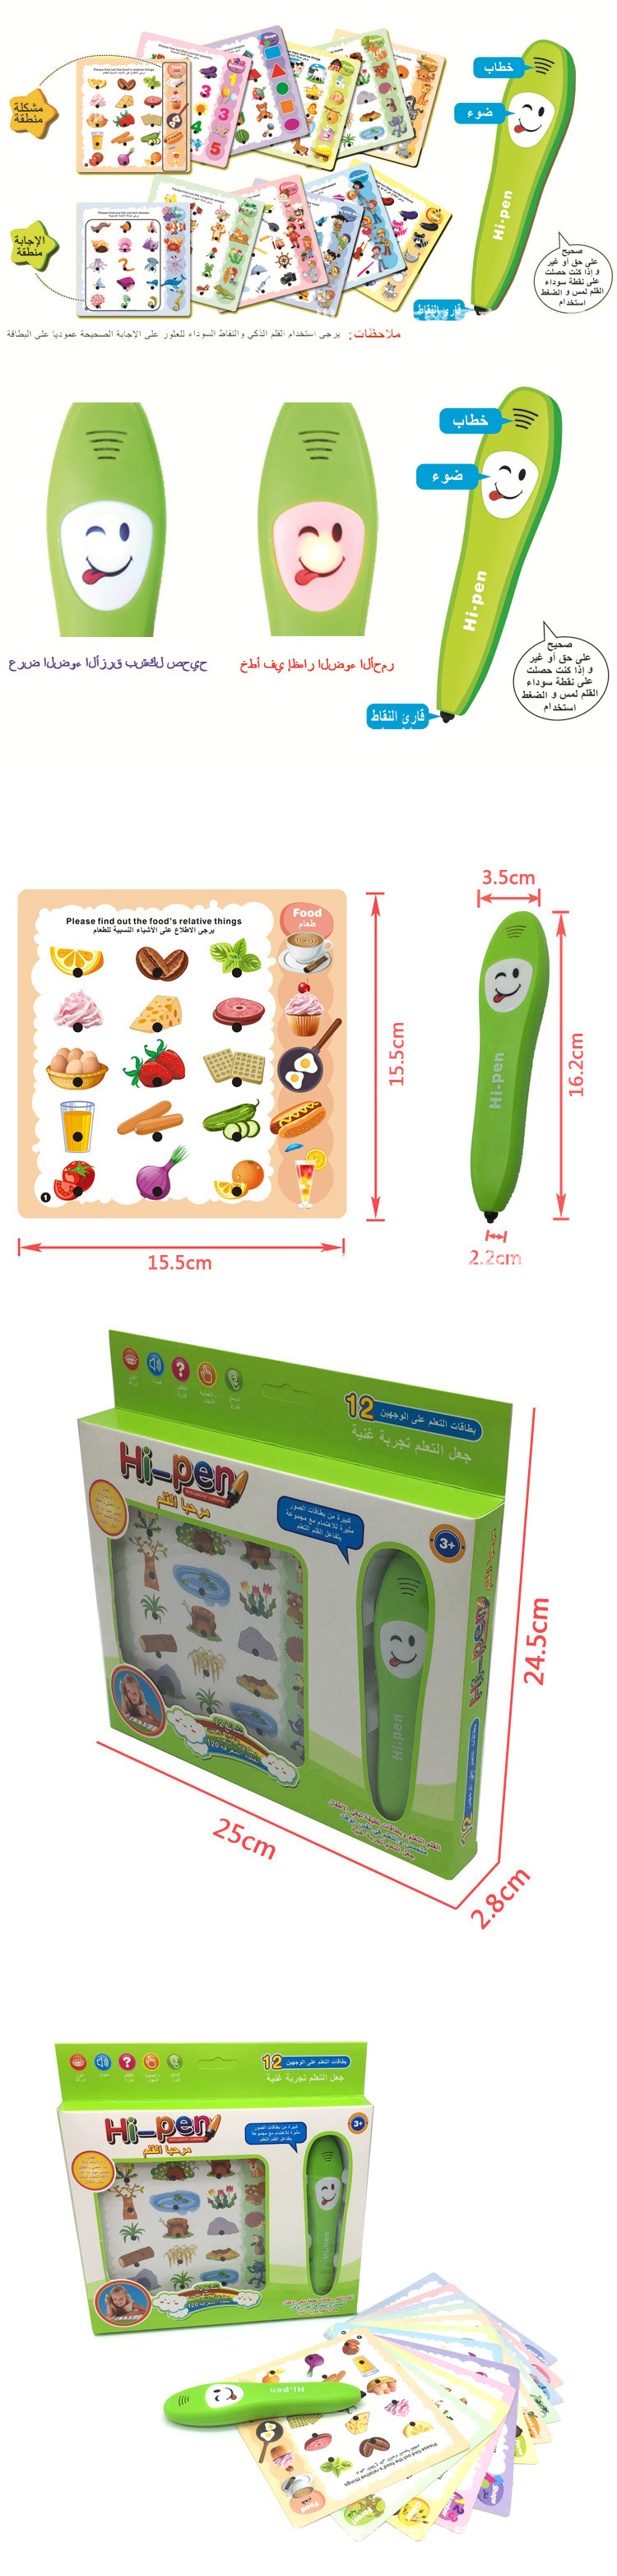 Multi-functional-Arabic-Language-Learning-Reading-Pen-Foreign-Language-Learning-Machine-Early-Educat-1591709-1